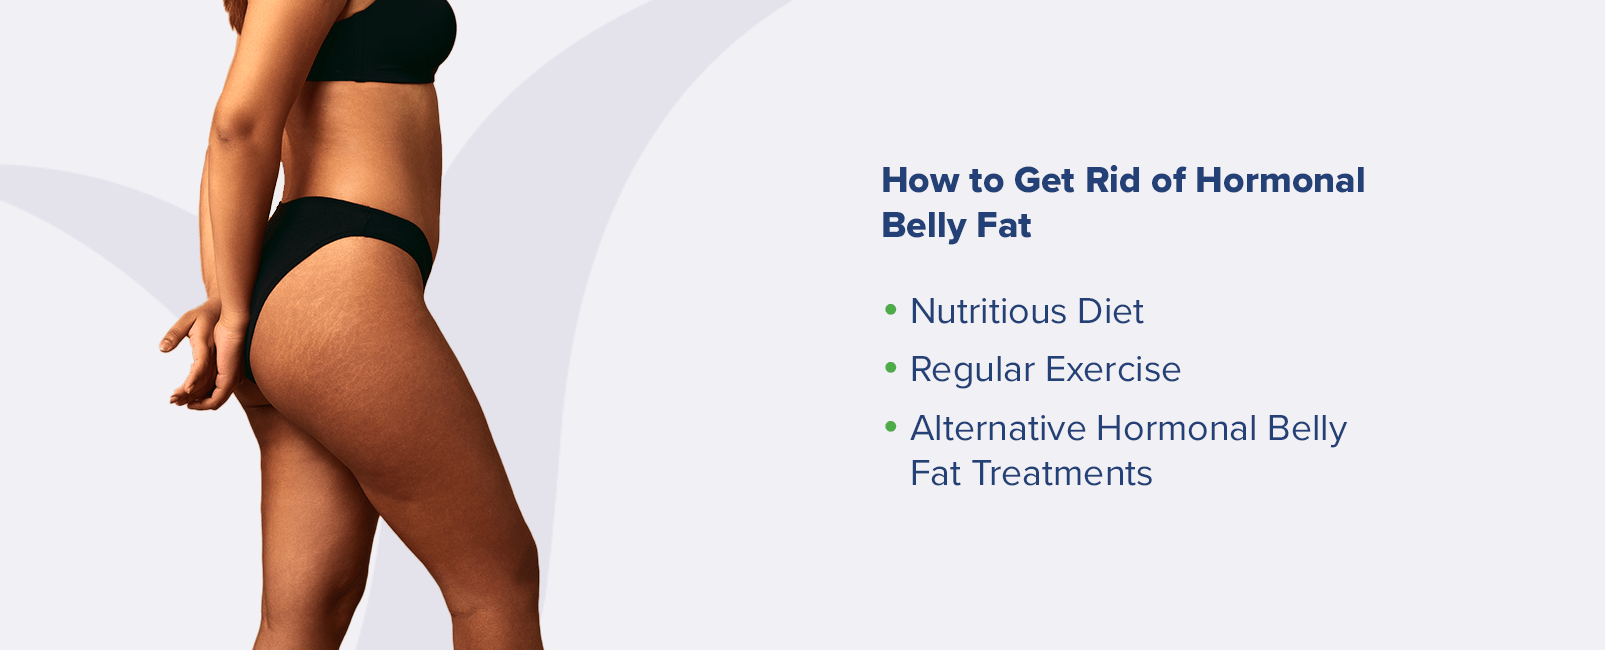 How to get rid of hormonal belly fat